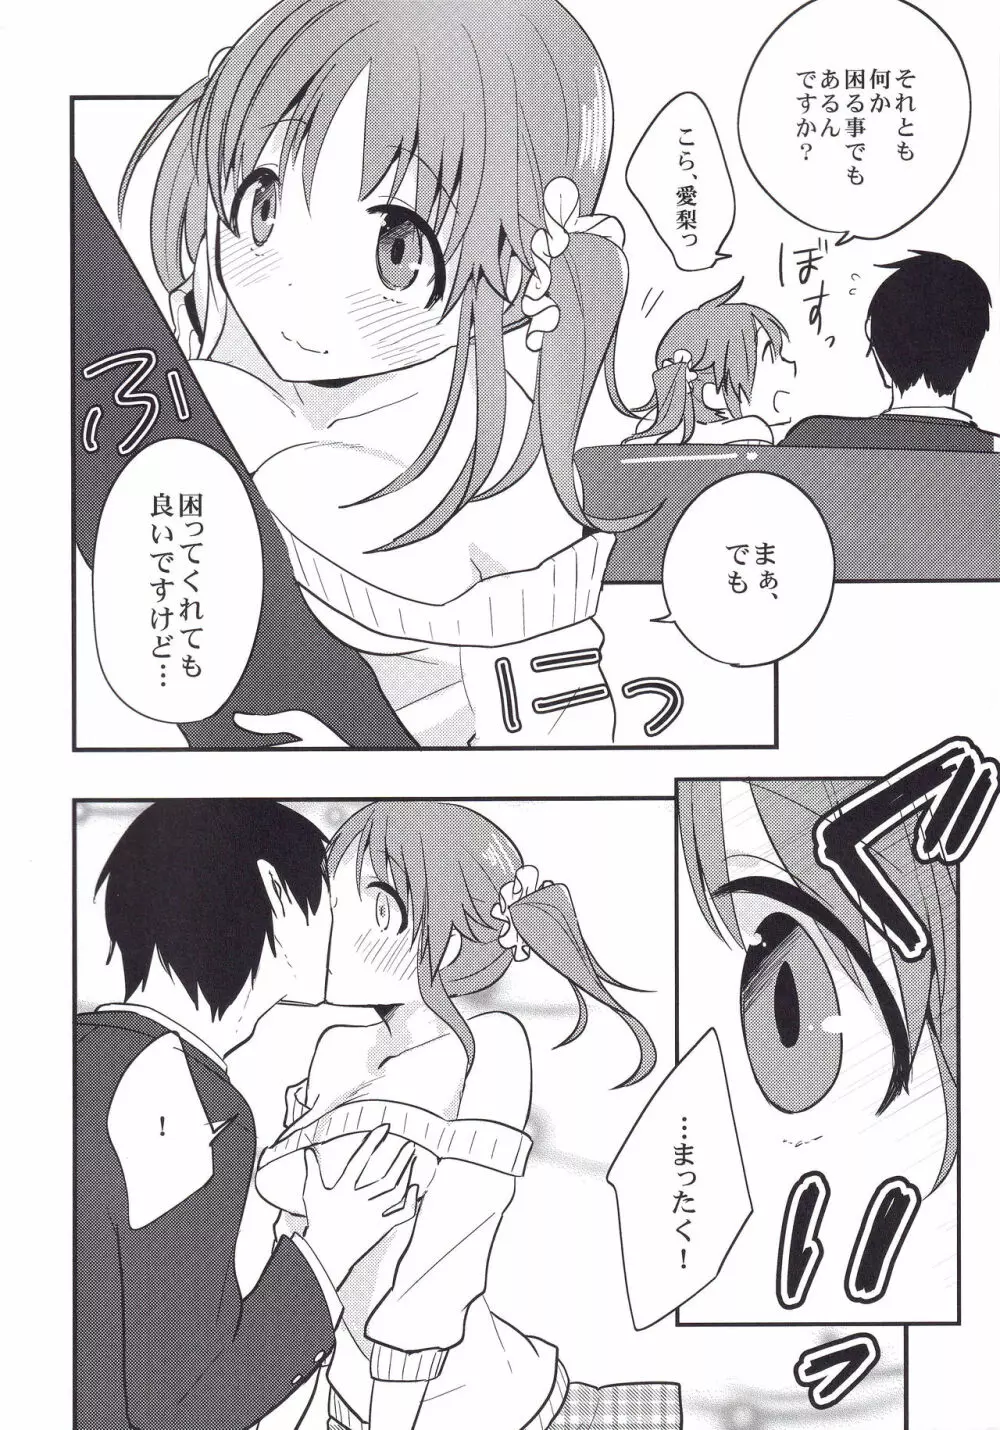 Inside affairs 03 Page.7